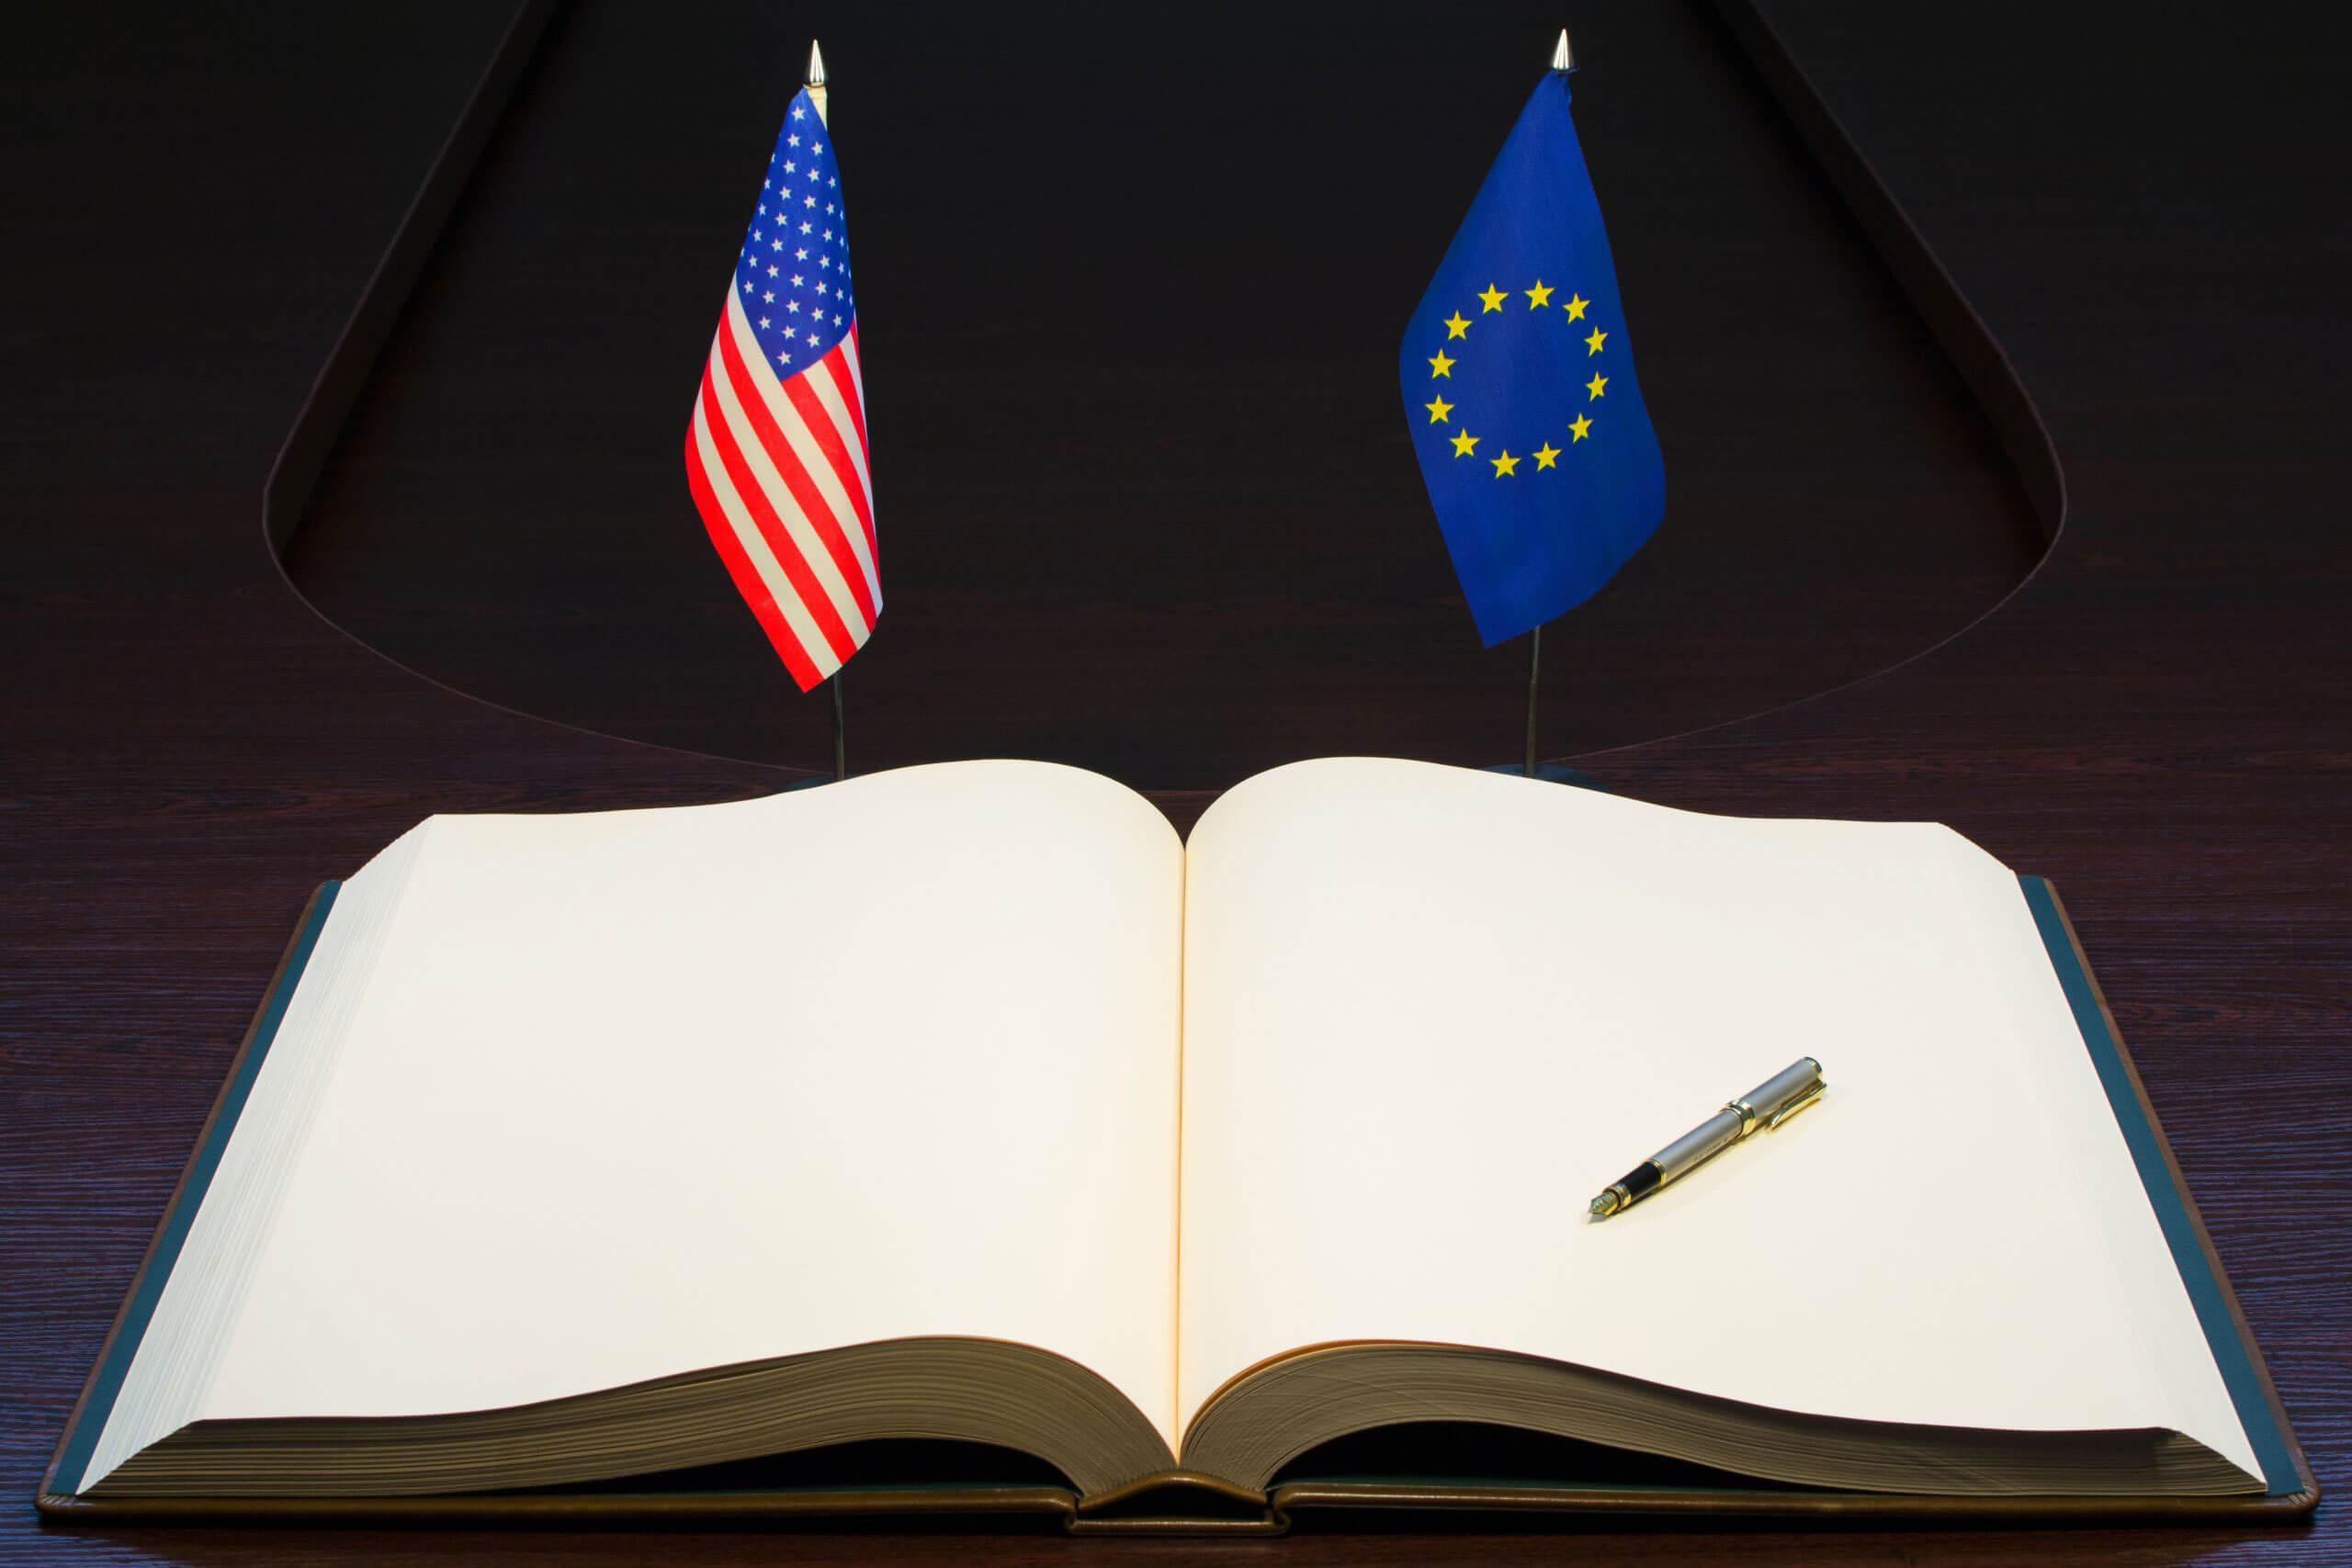 a pen is sitting on top of an open book in front of two flags